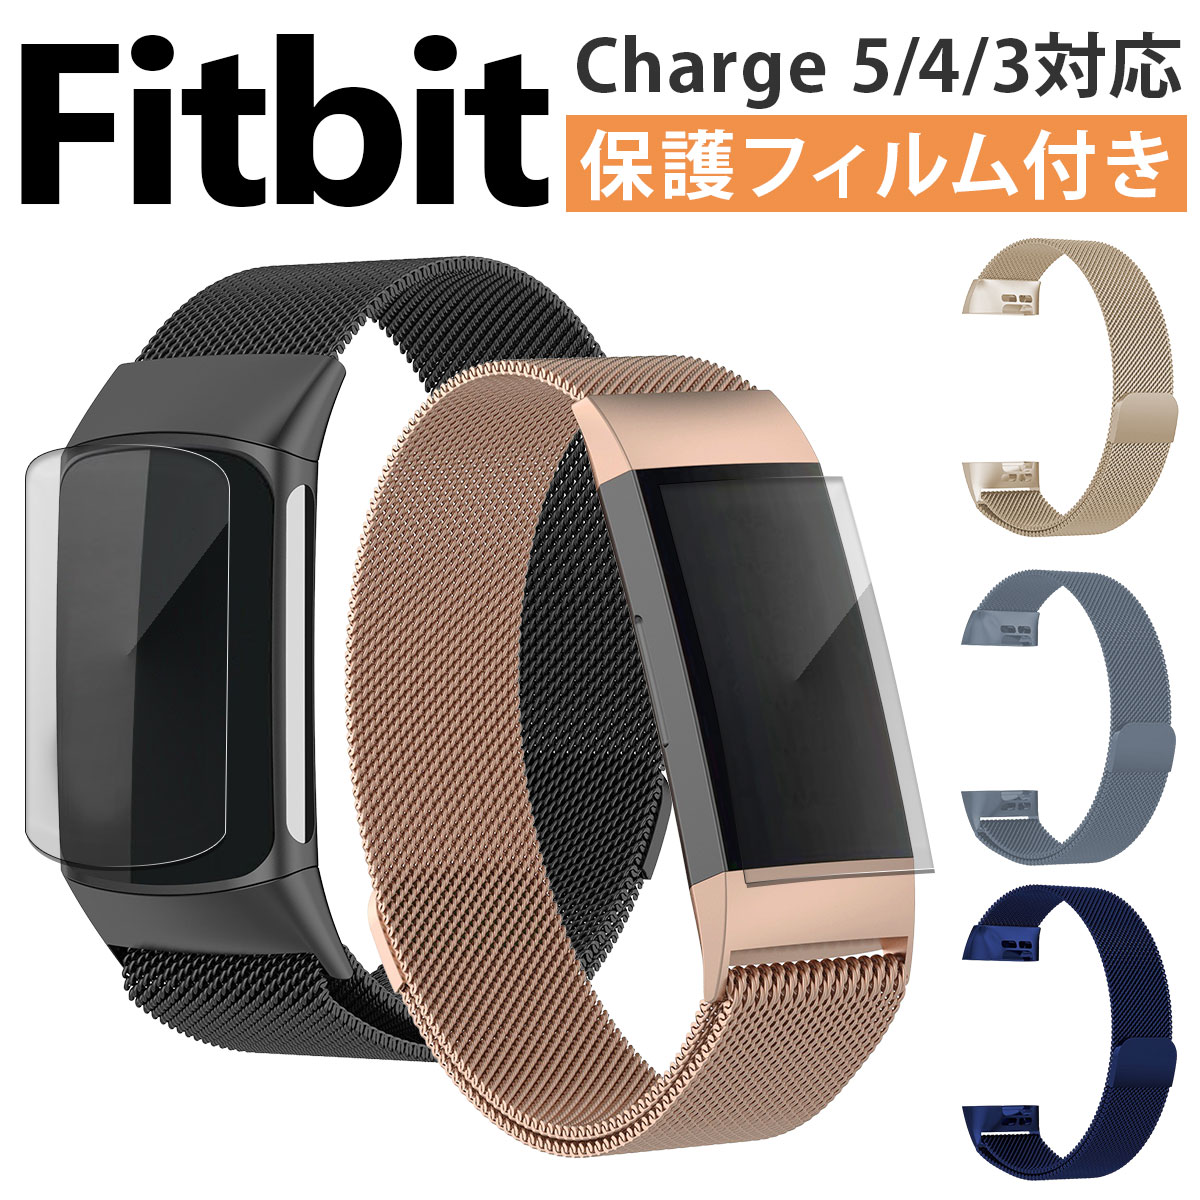 Fitbit charge charge charge 交換 バンド ステンレス フィットビット チャージ5 チャージ4 チャージ3 対応  互換品 金属 保護フィルム カバー セット :d825:いいひ 店 通販 